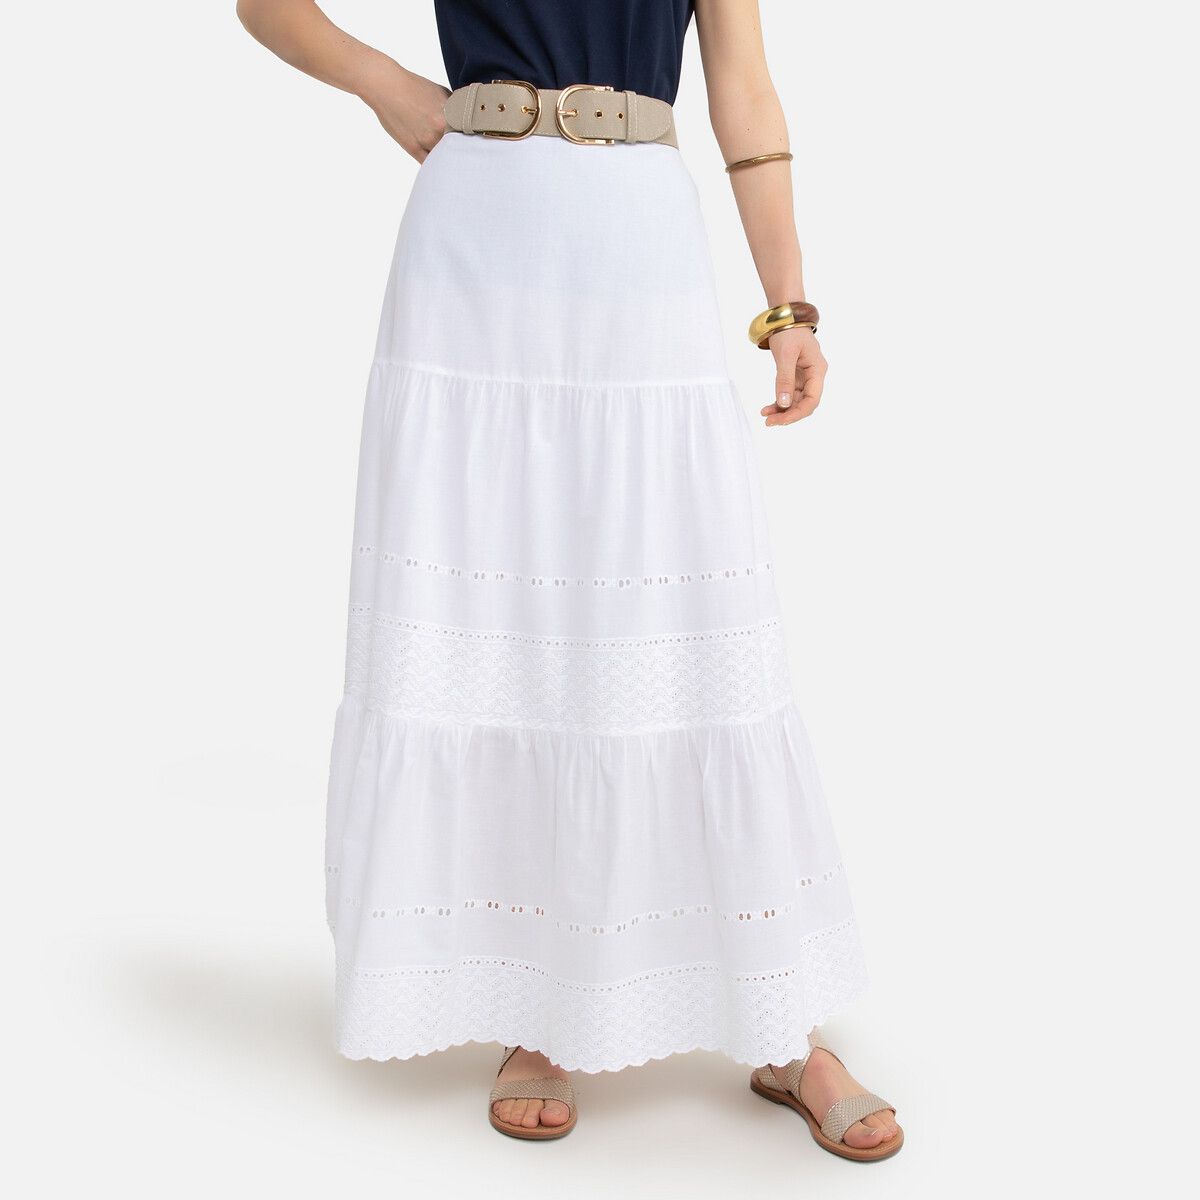 Broderie Anglaise Maxi Skirt in Cotton | La Redoute (UK)